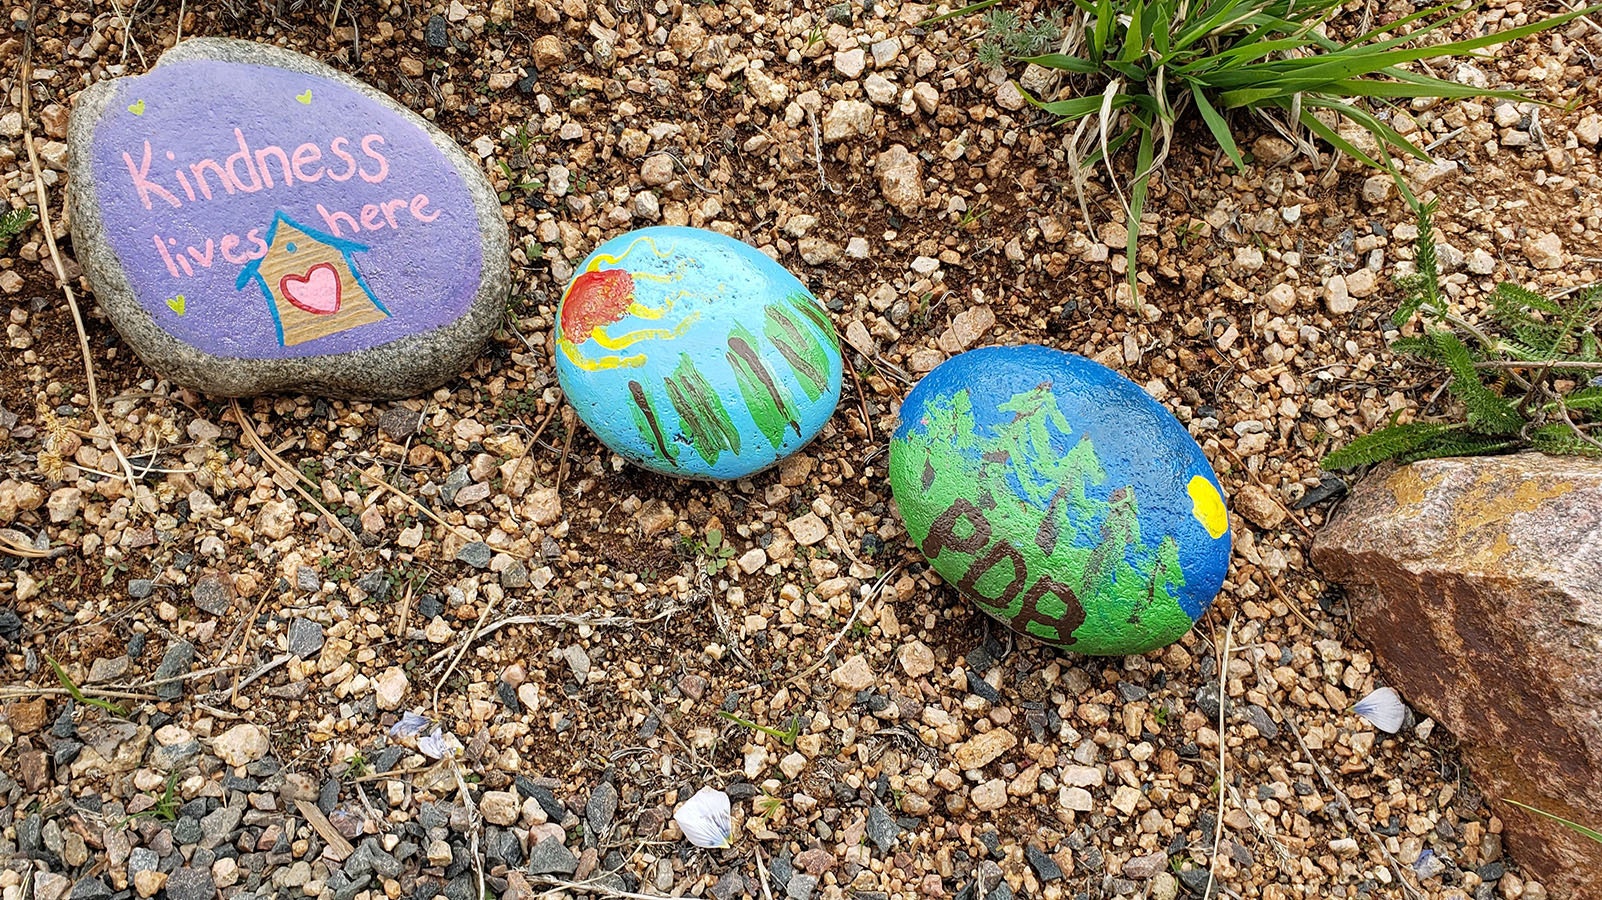 Kindness rocks lined the pathway to Little House on the Park.